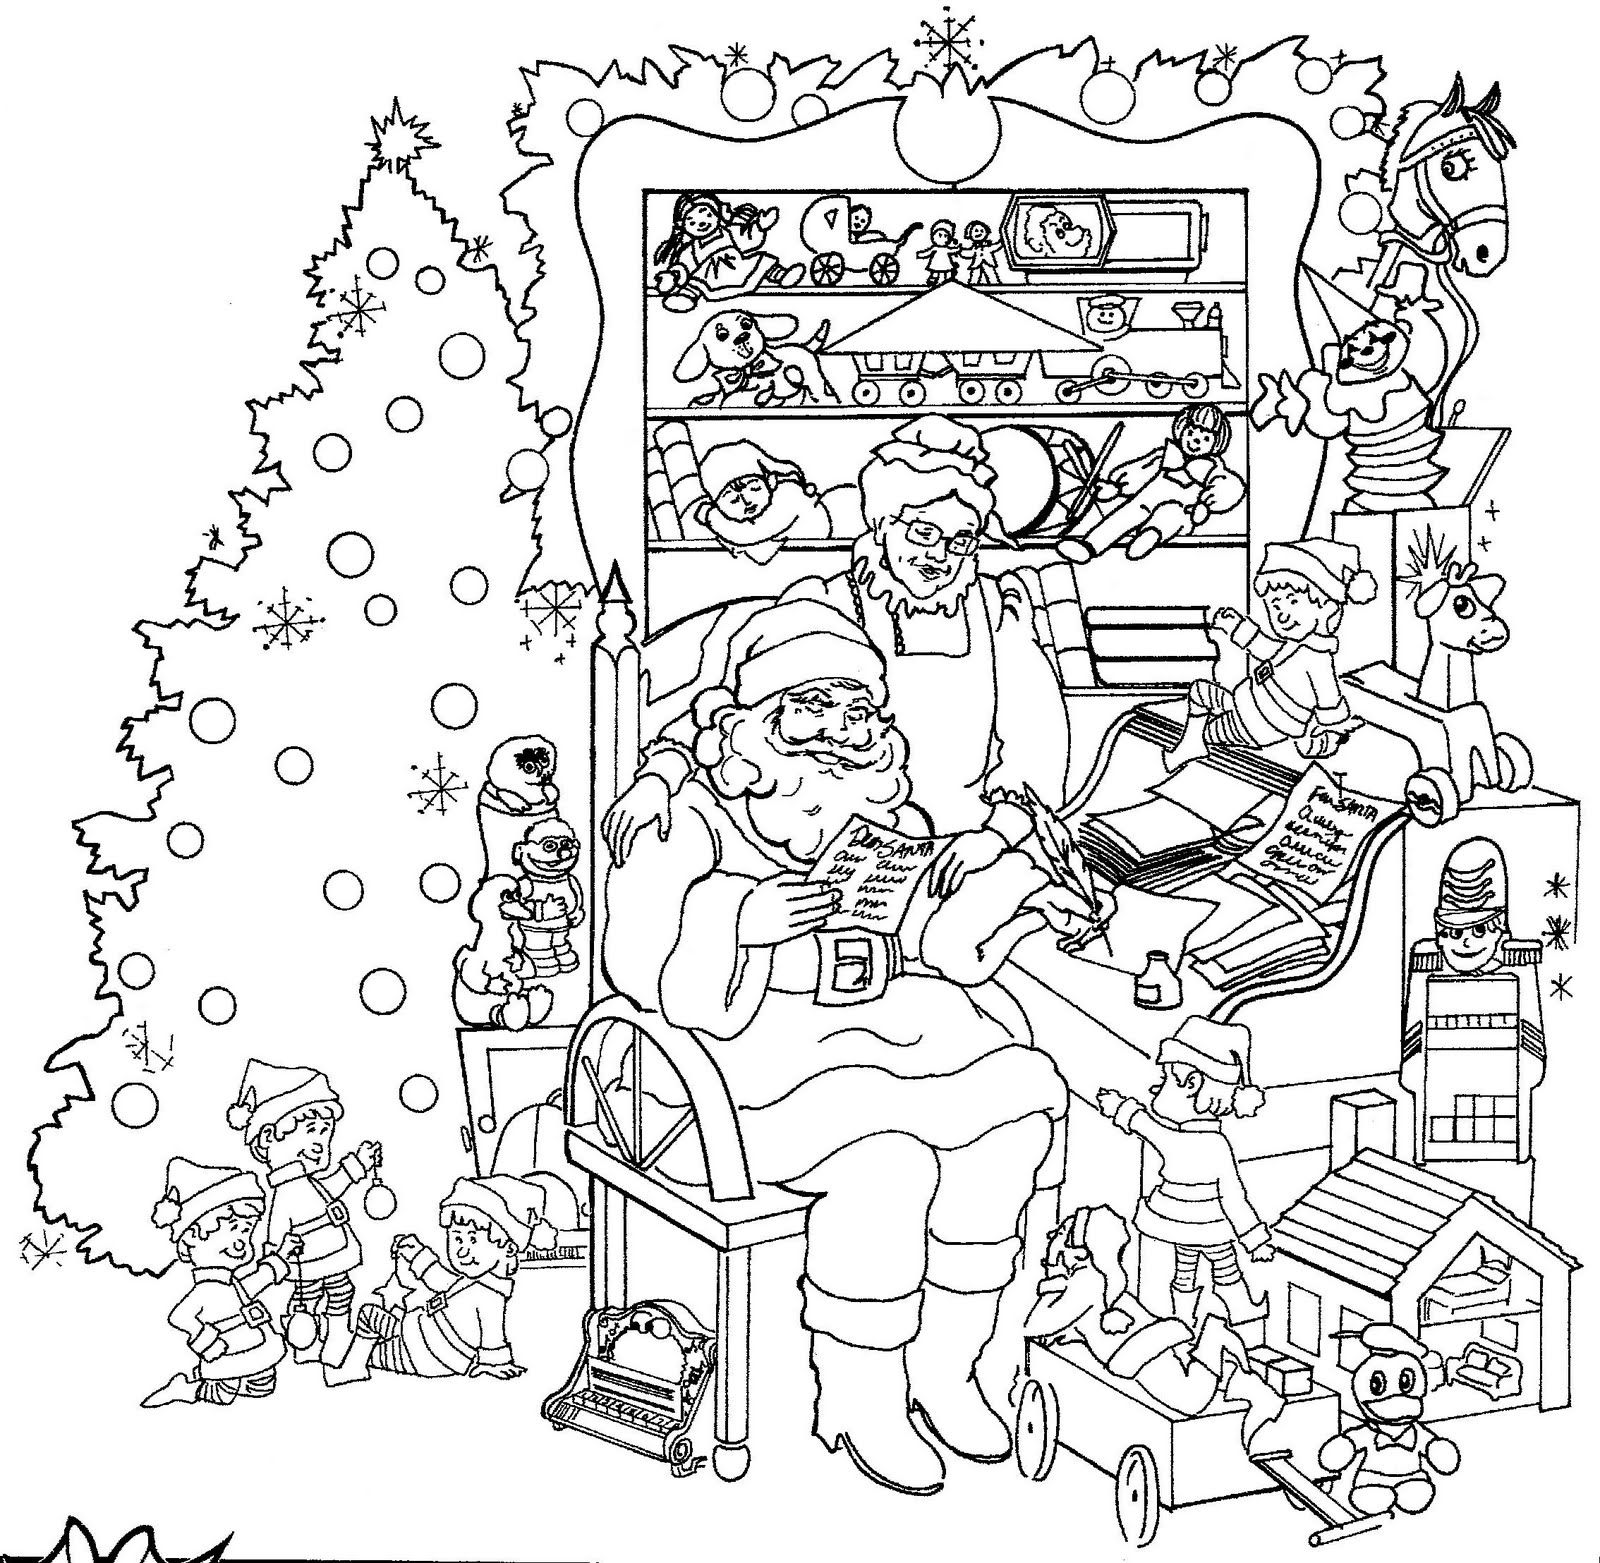 Adult detailed coloring pages christmas | www.veupropia.org